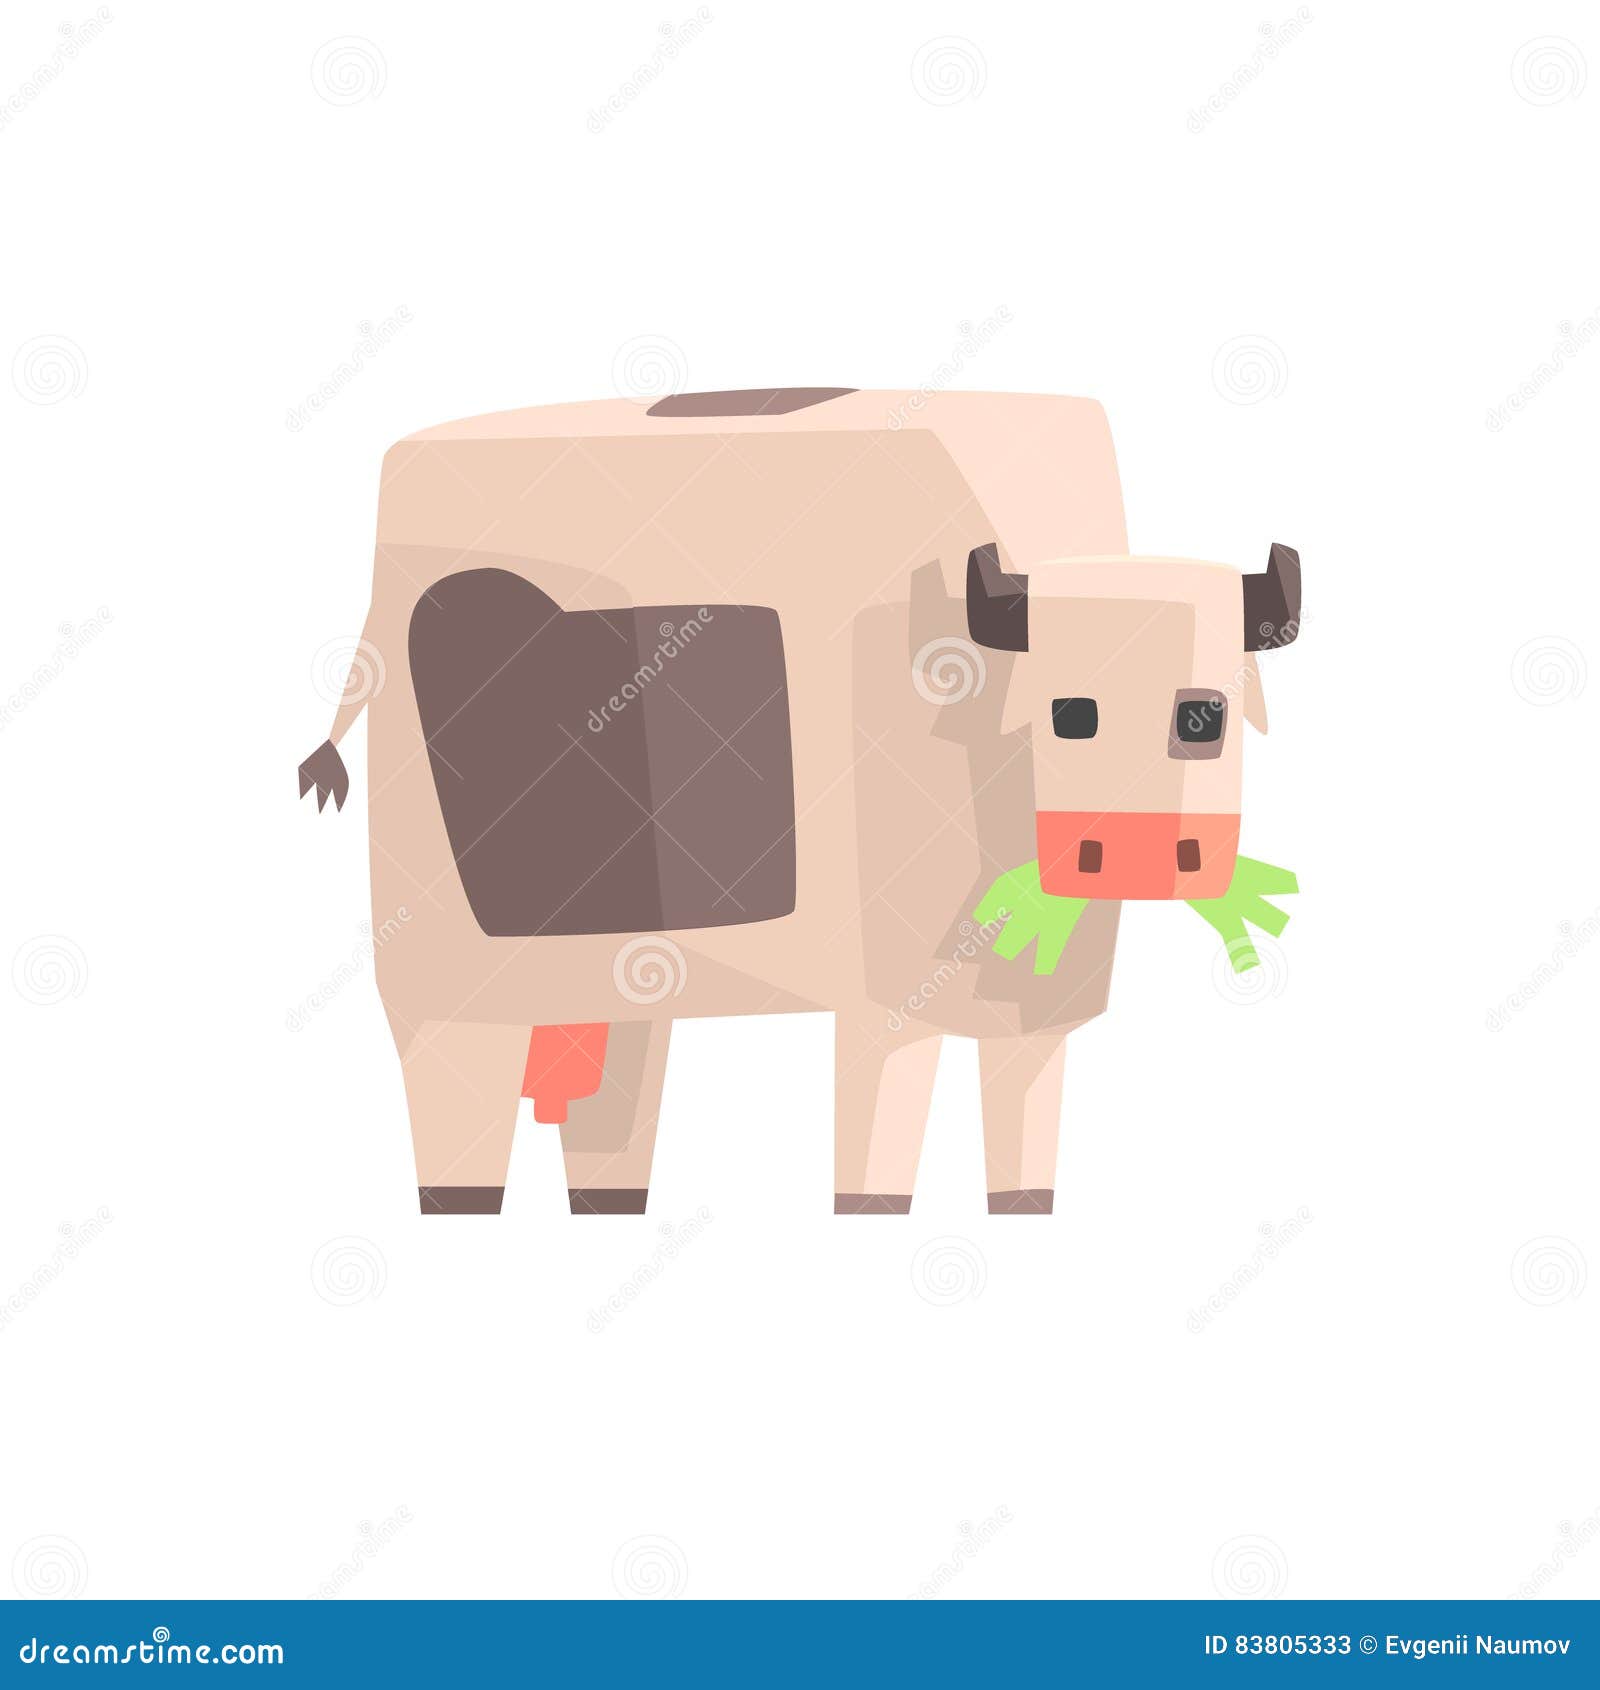 Toy Simple Geometric Farm Cow Browsing with Mouth Full of Grass, Funny  Animal Vector Illustration Stock Vector - Illustration of pink, milk:  83805333